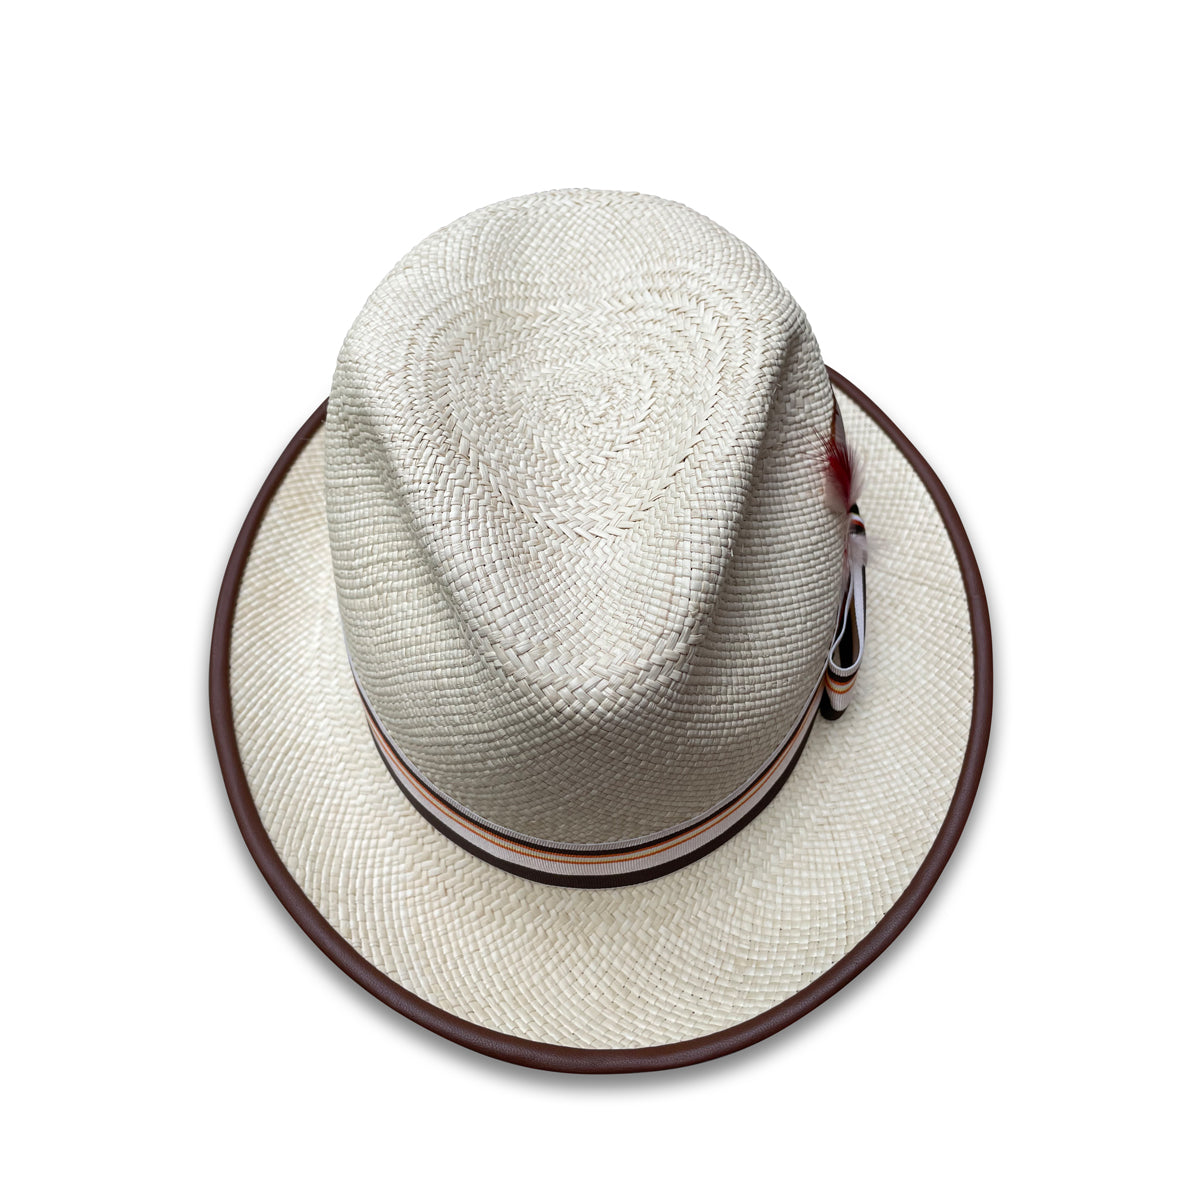 Stingy Brim Panama Hat from Cha Cha's House of Ill Repute